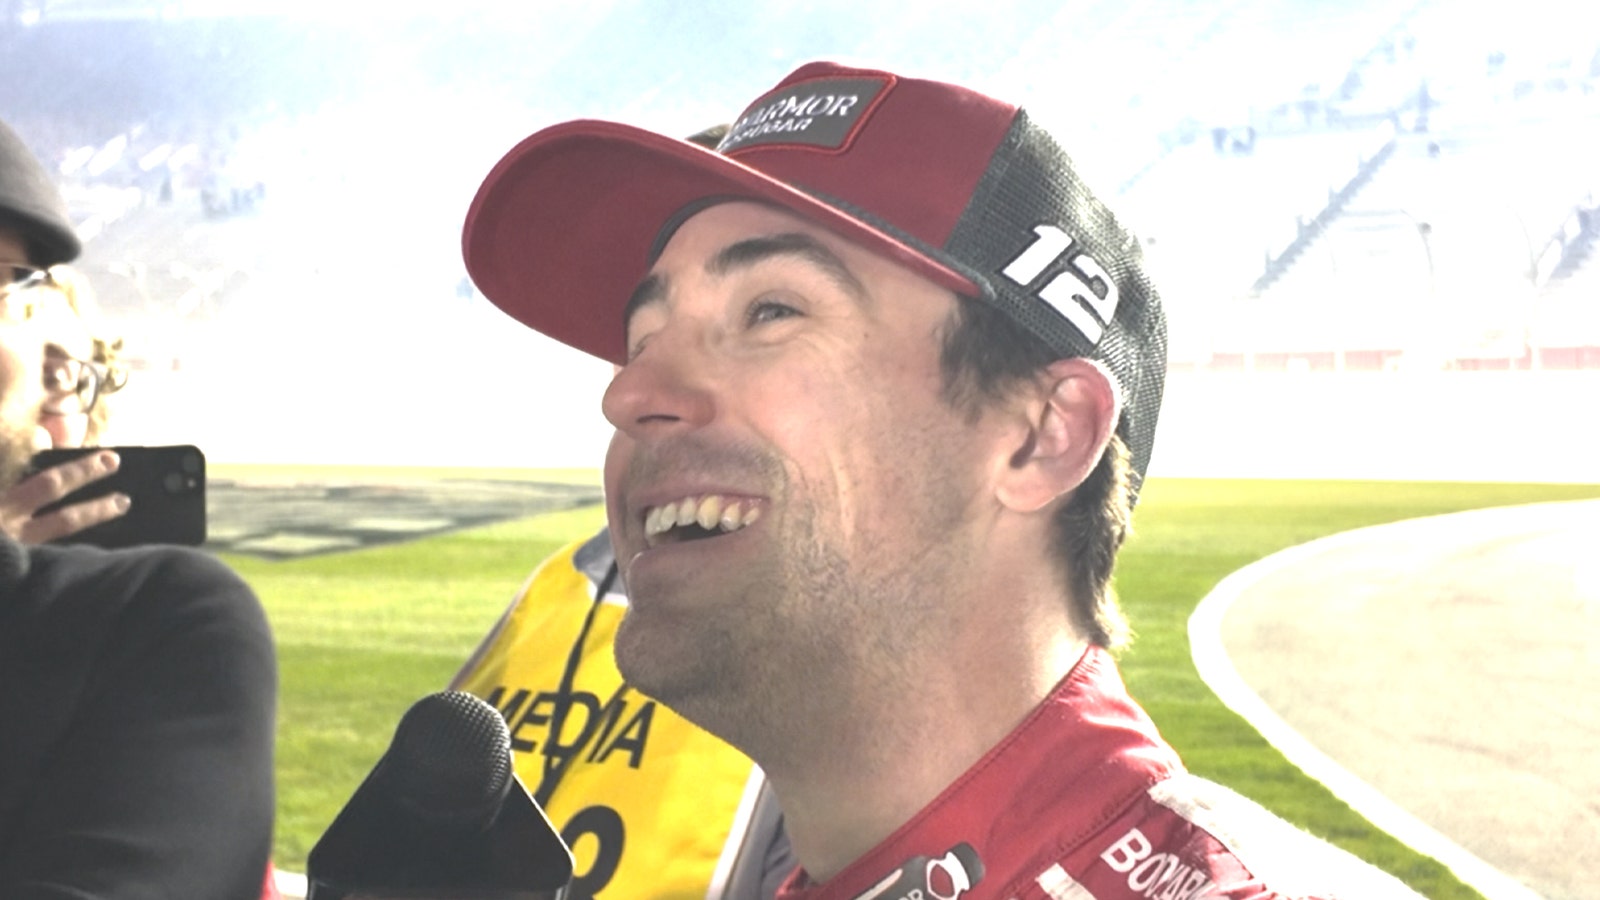 'That was so close' - Ryan Blaney reacts to seeing the photo finish at the Ambetter Health 400 